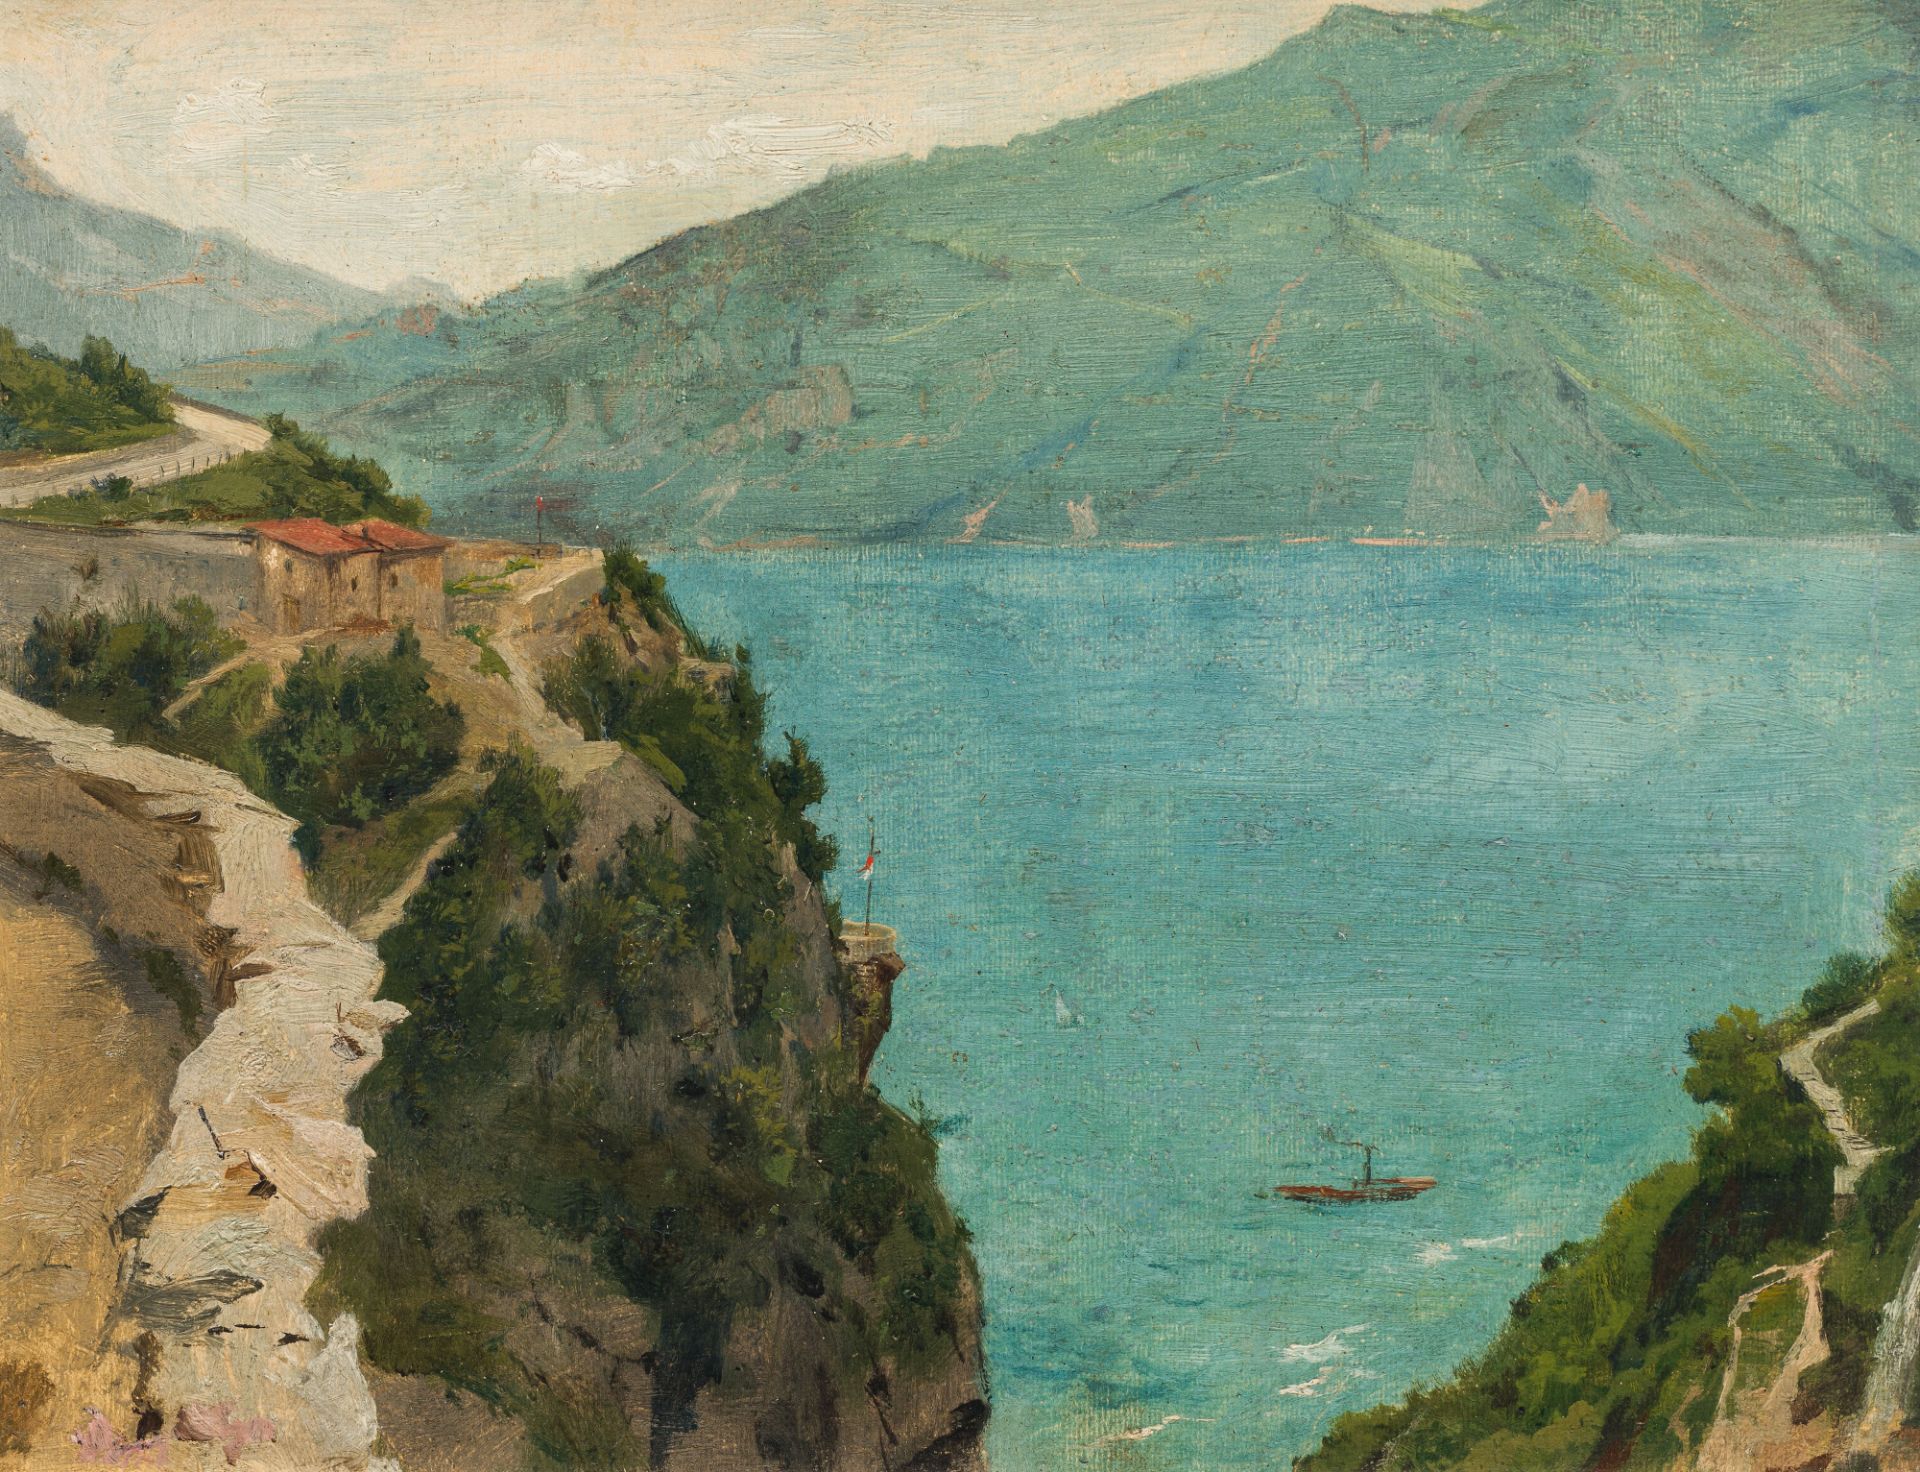 Emilie Mediz-Pelikan: the small steamer (view into the river valley, Isonzo?)